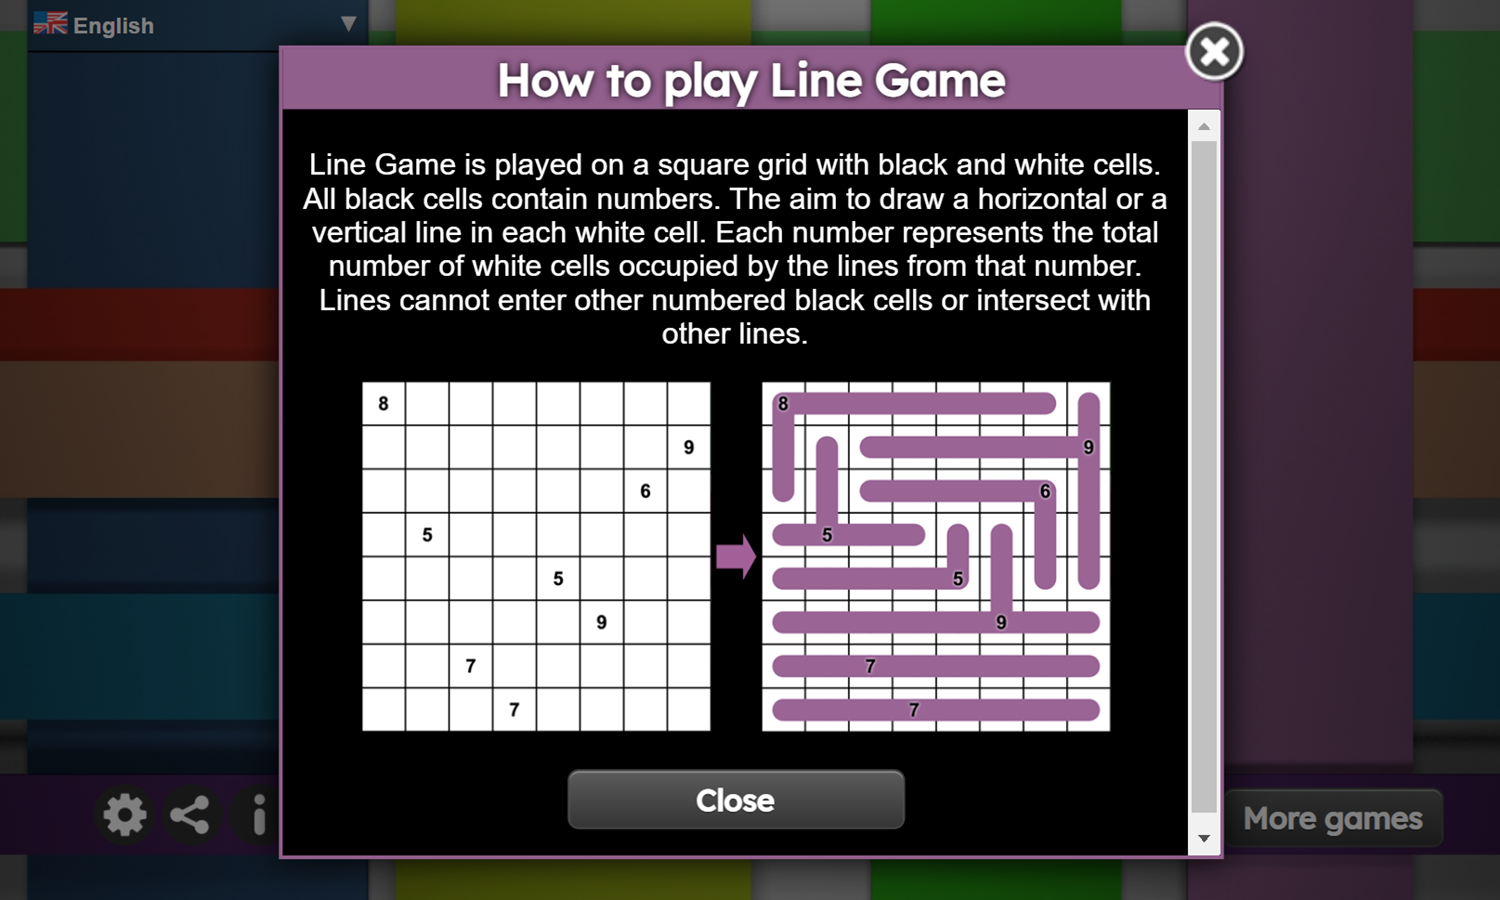 Daily Line Game How To Play Screenshot.